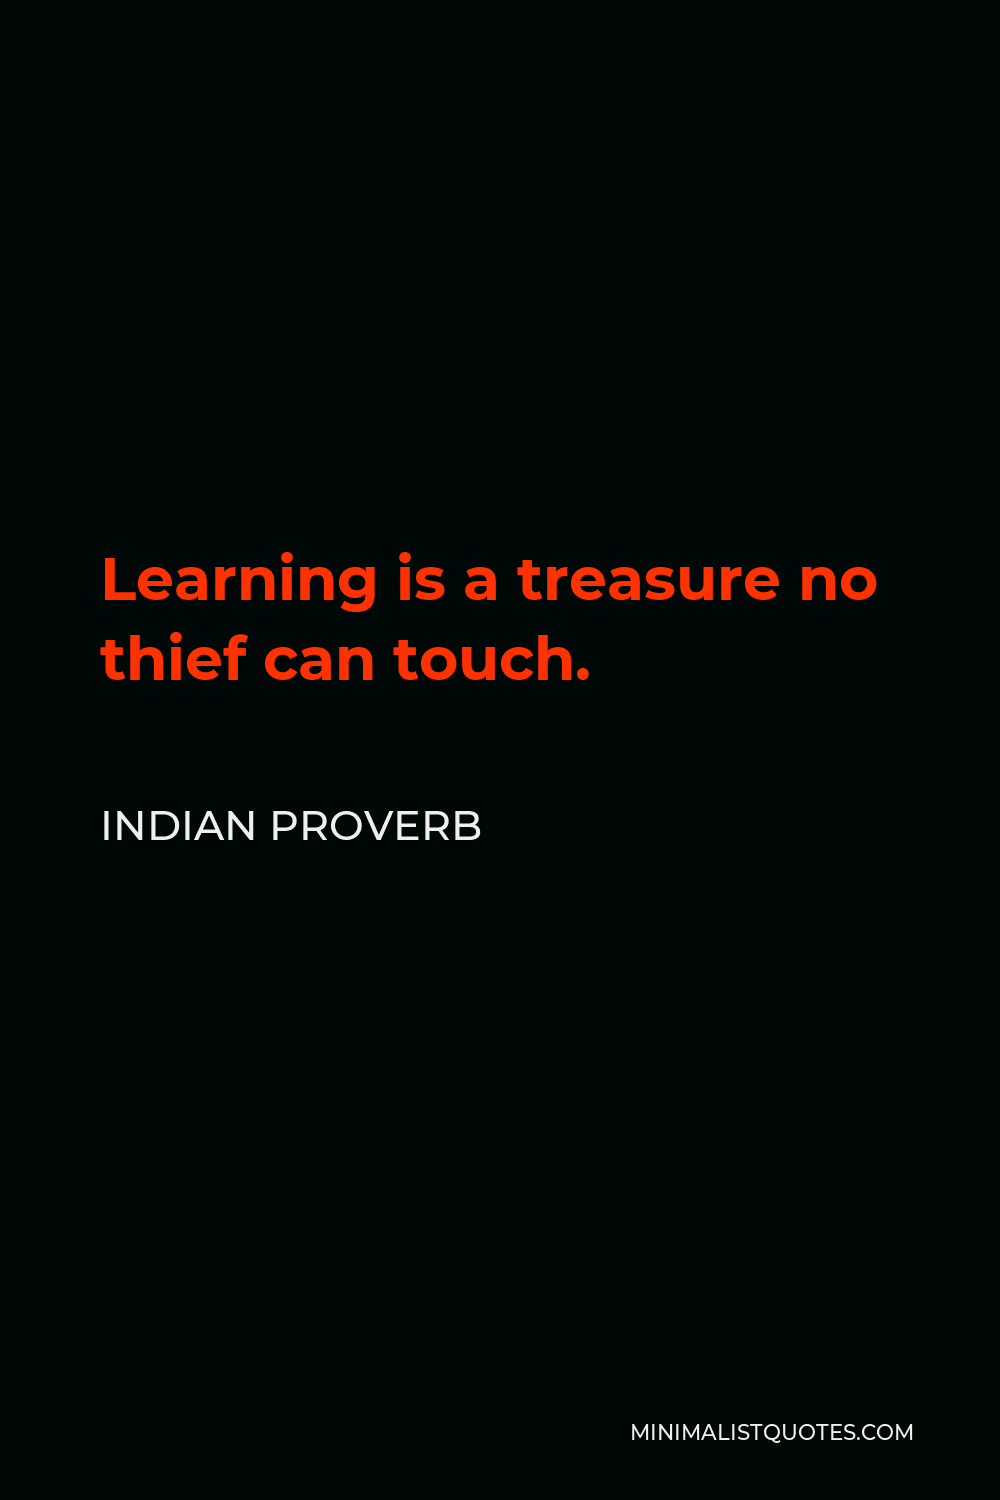 Indian Proverb Quote - Learning is a treasure no thief can touch.